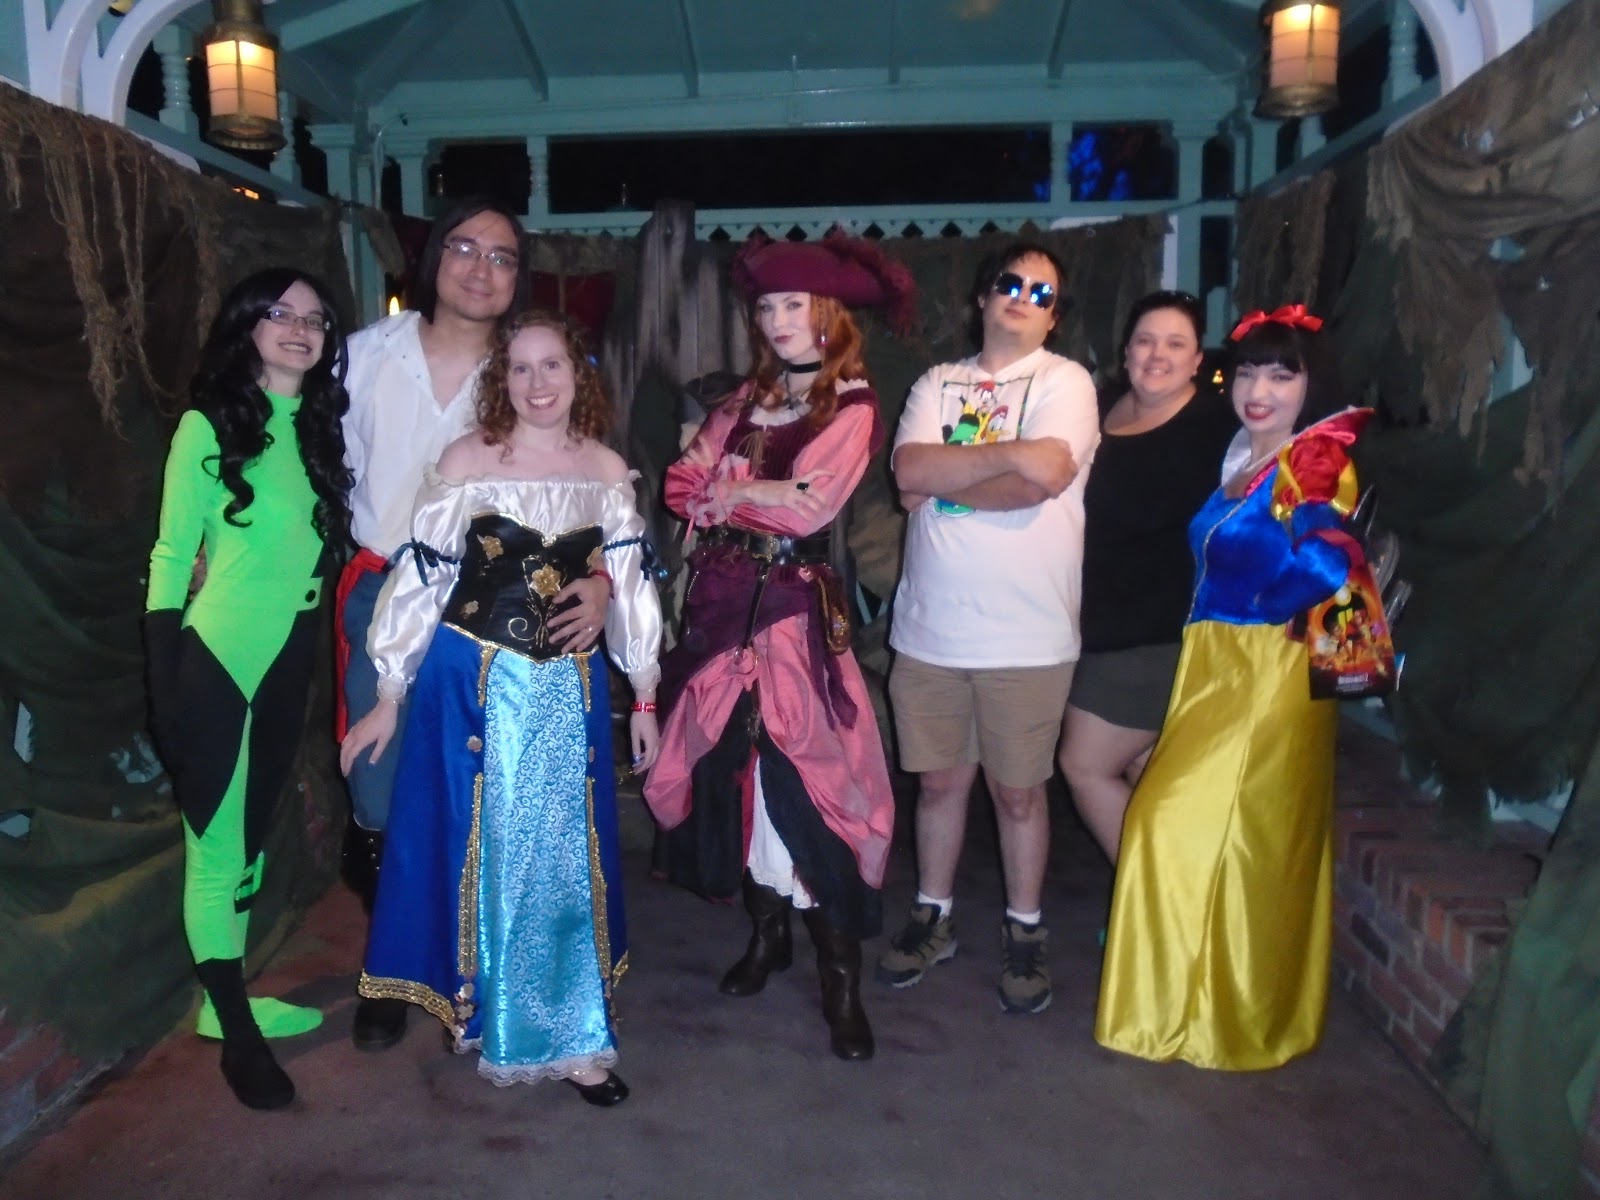 Mickey's Halloween Party Is a Great Place To Be a Princess! Weird People At Disneyland